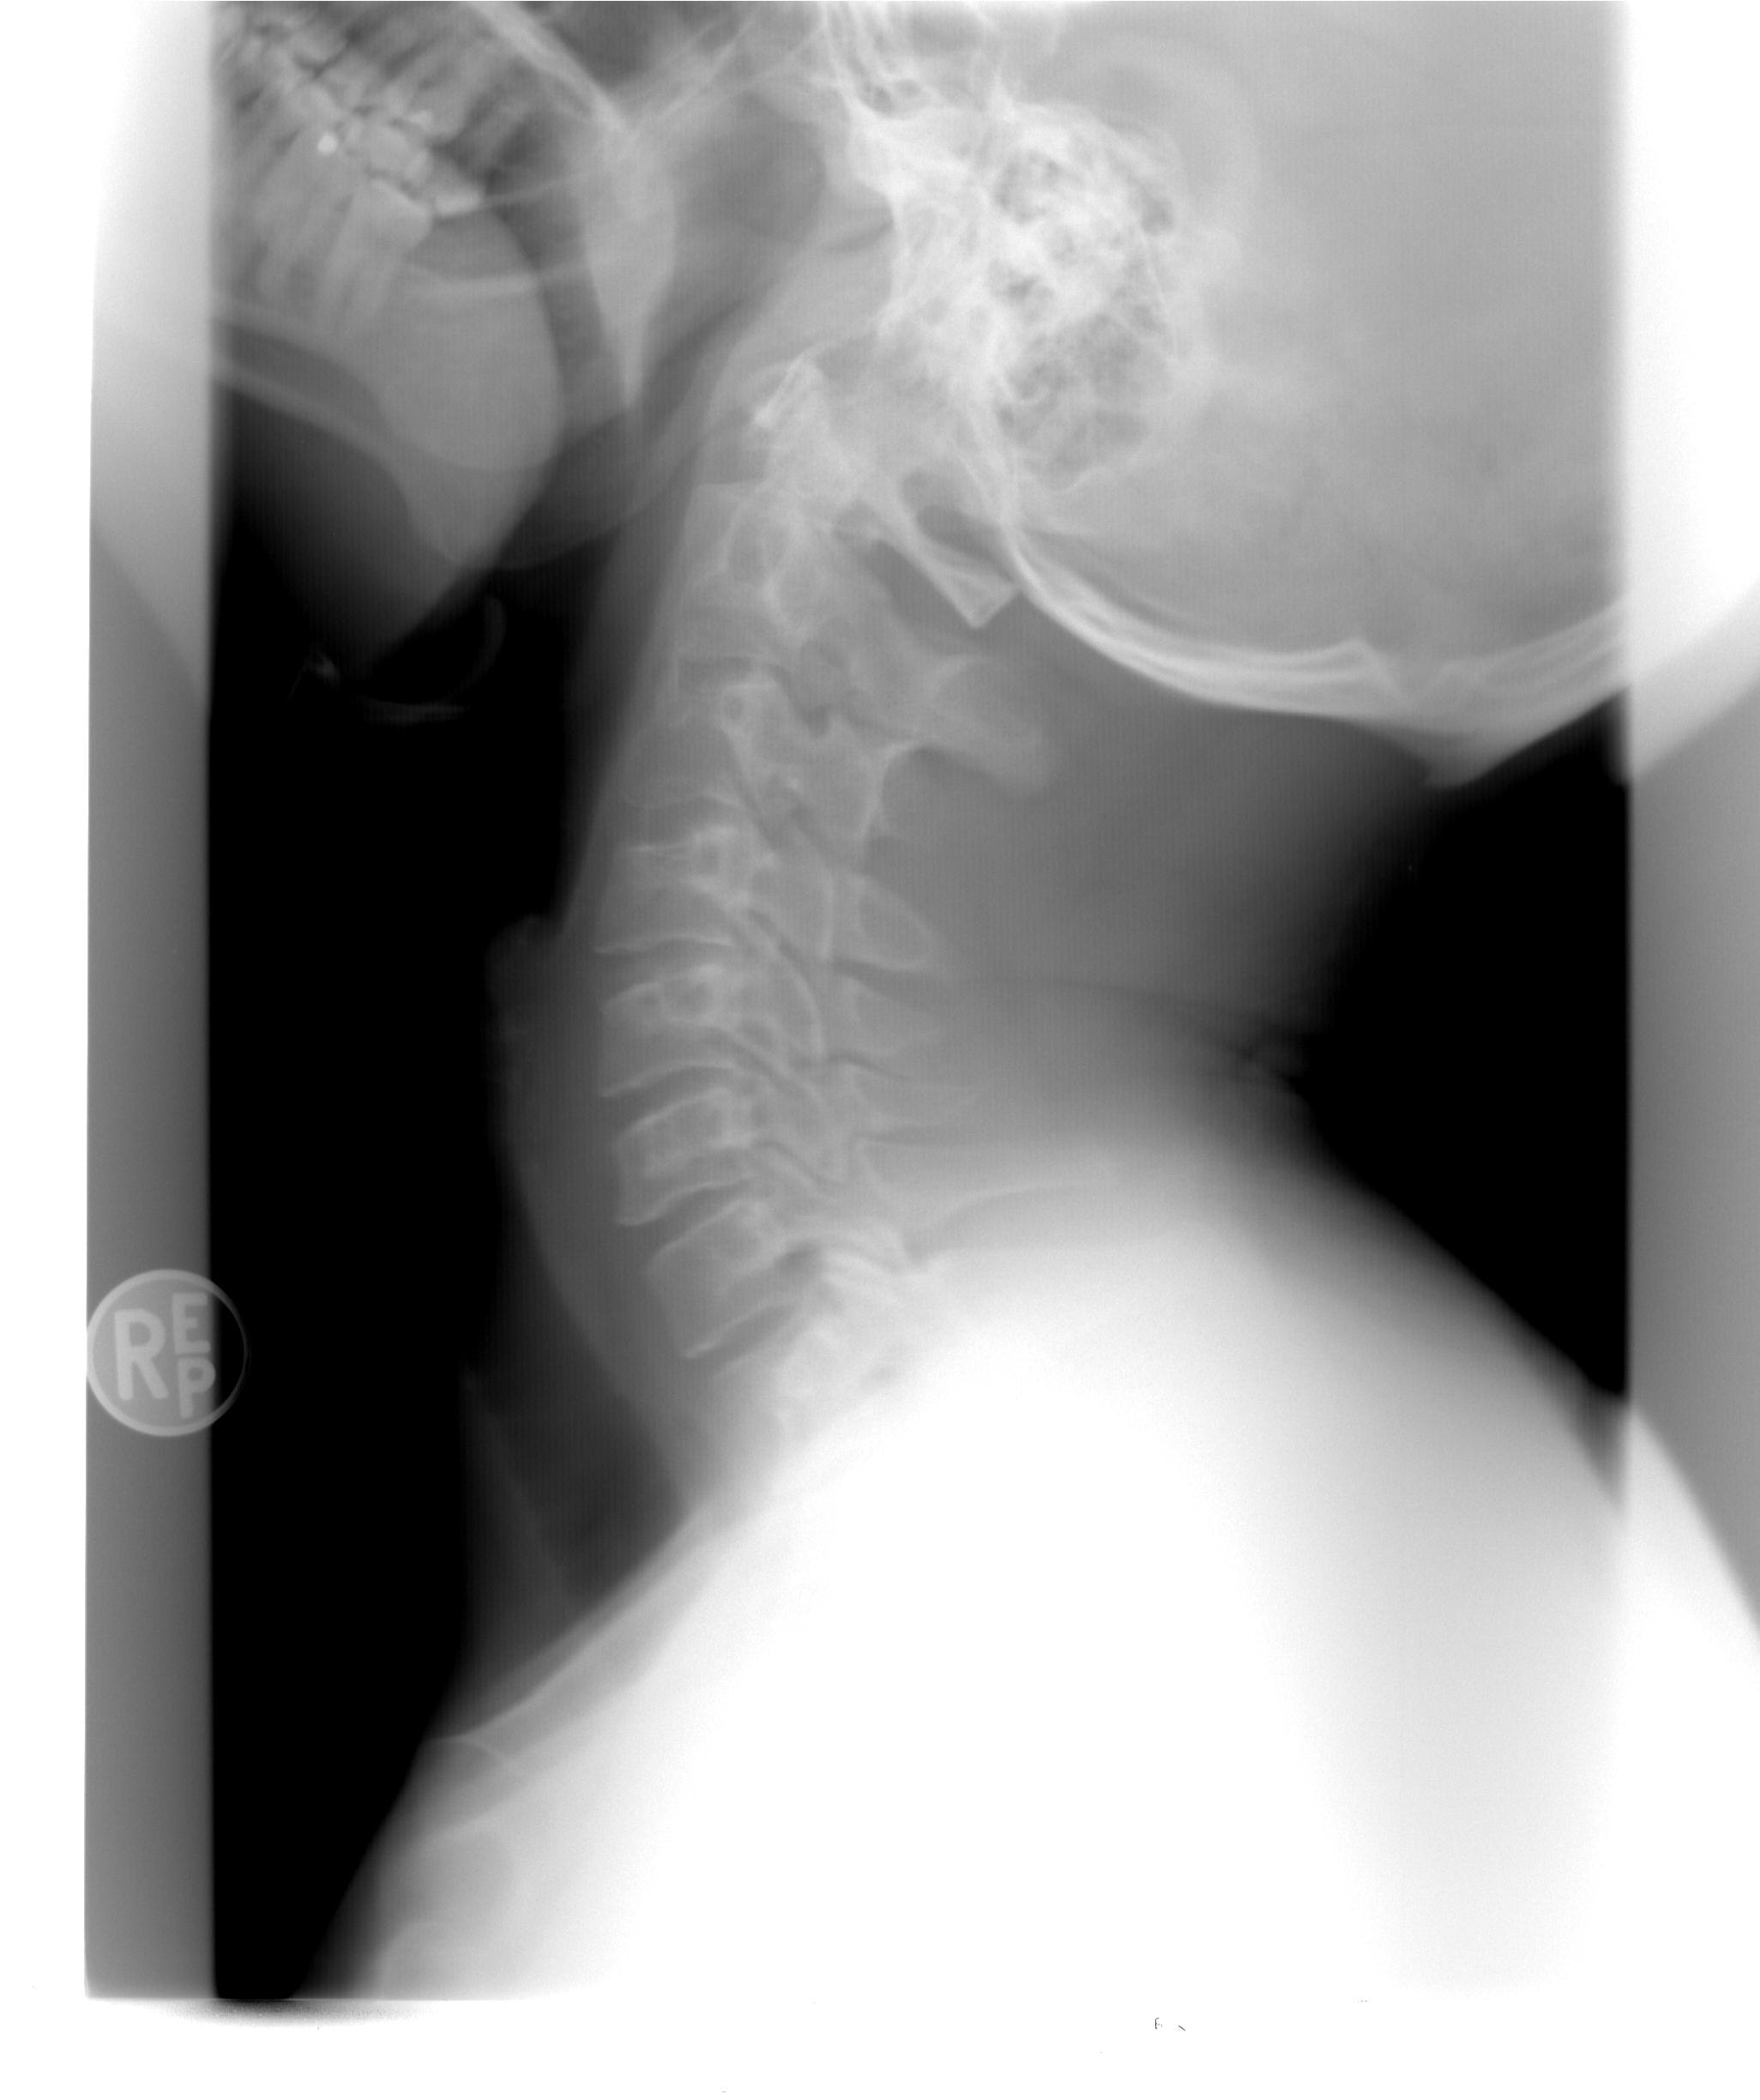 Neck x-ray result